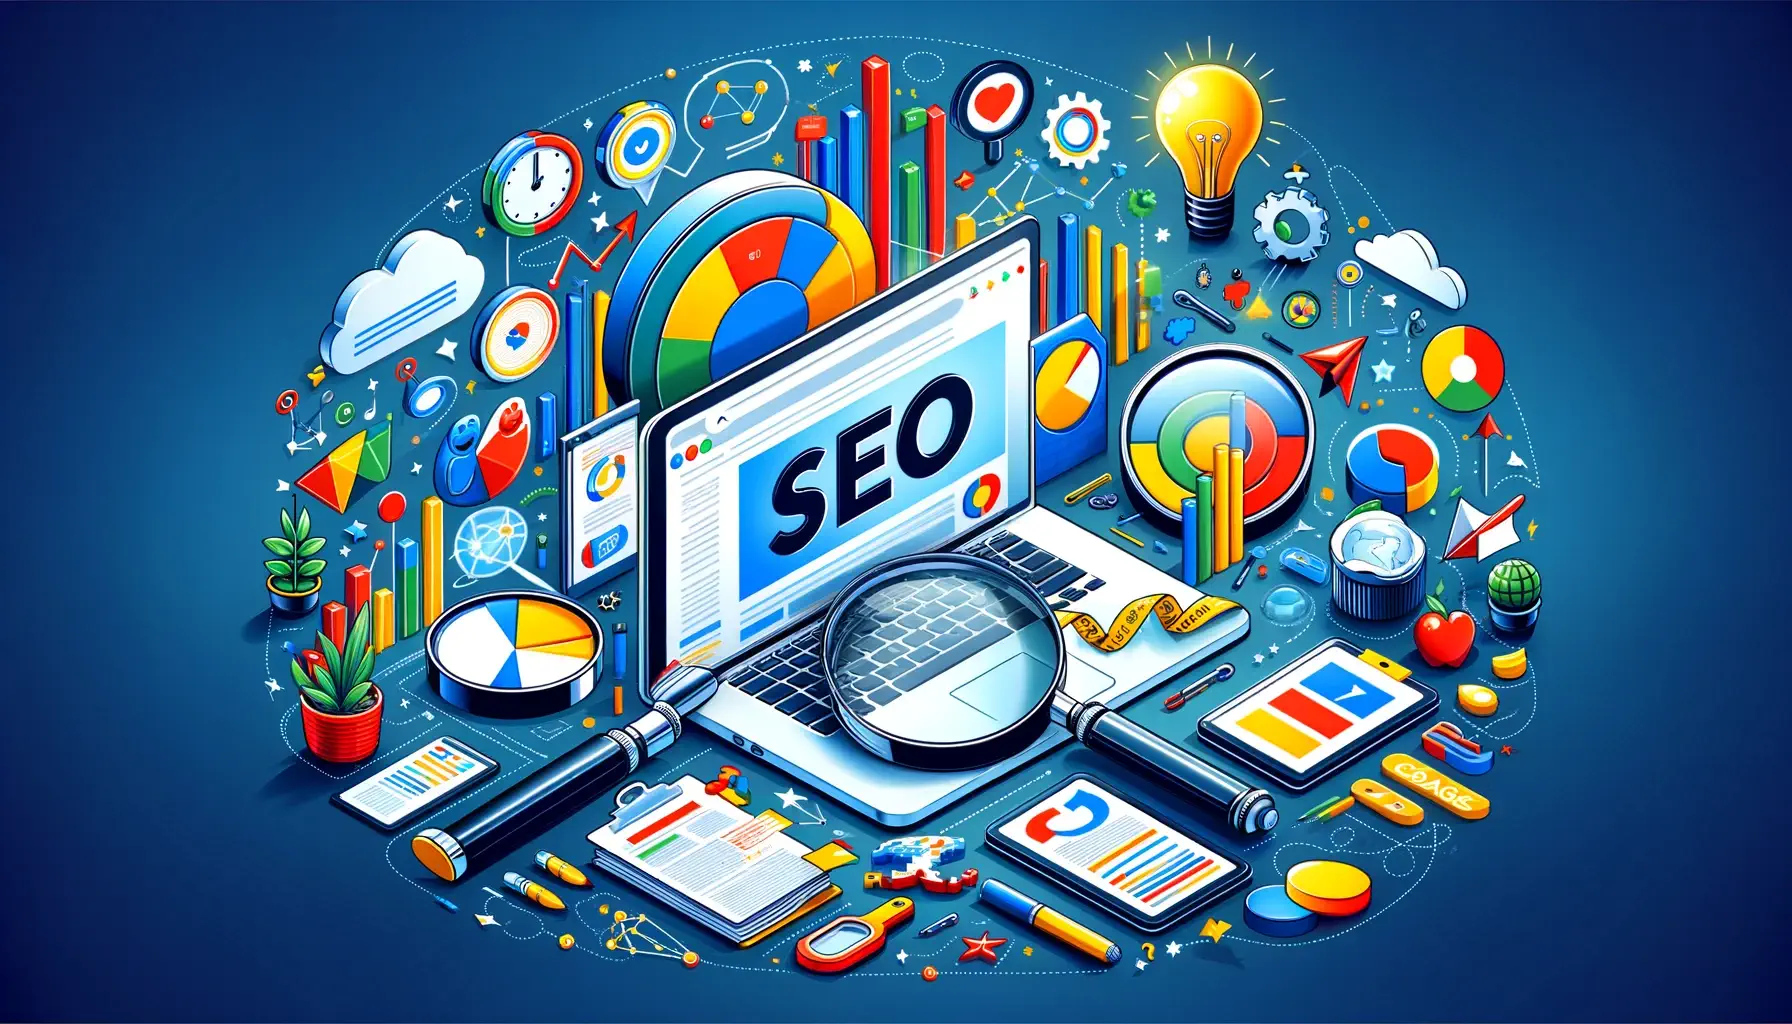 Illustrative concept for 'Maximizing SEO: On-page and Off-page SEO Strategies' with a laptop displaying SEO surrounded by colorful, dynamic icons of charts, keywords, backlinks, and social media, all in Google's colors.